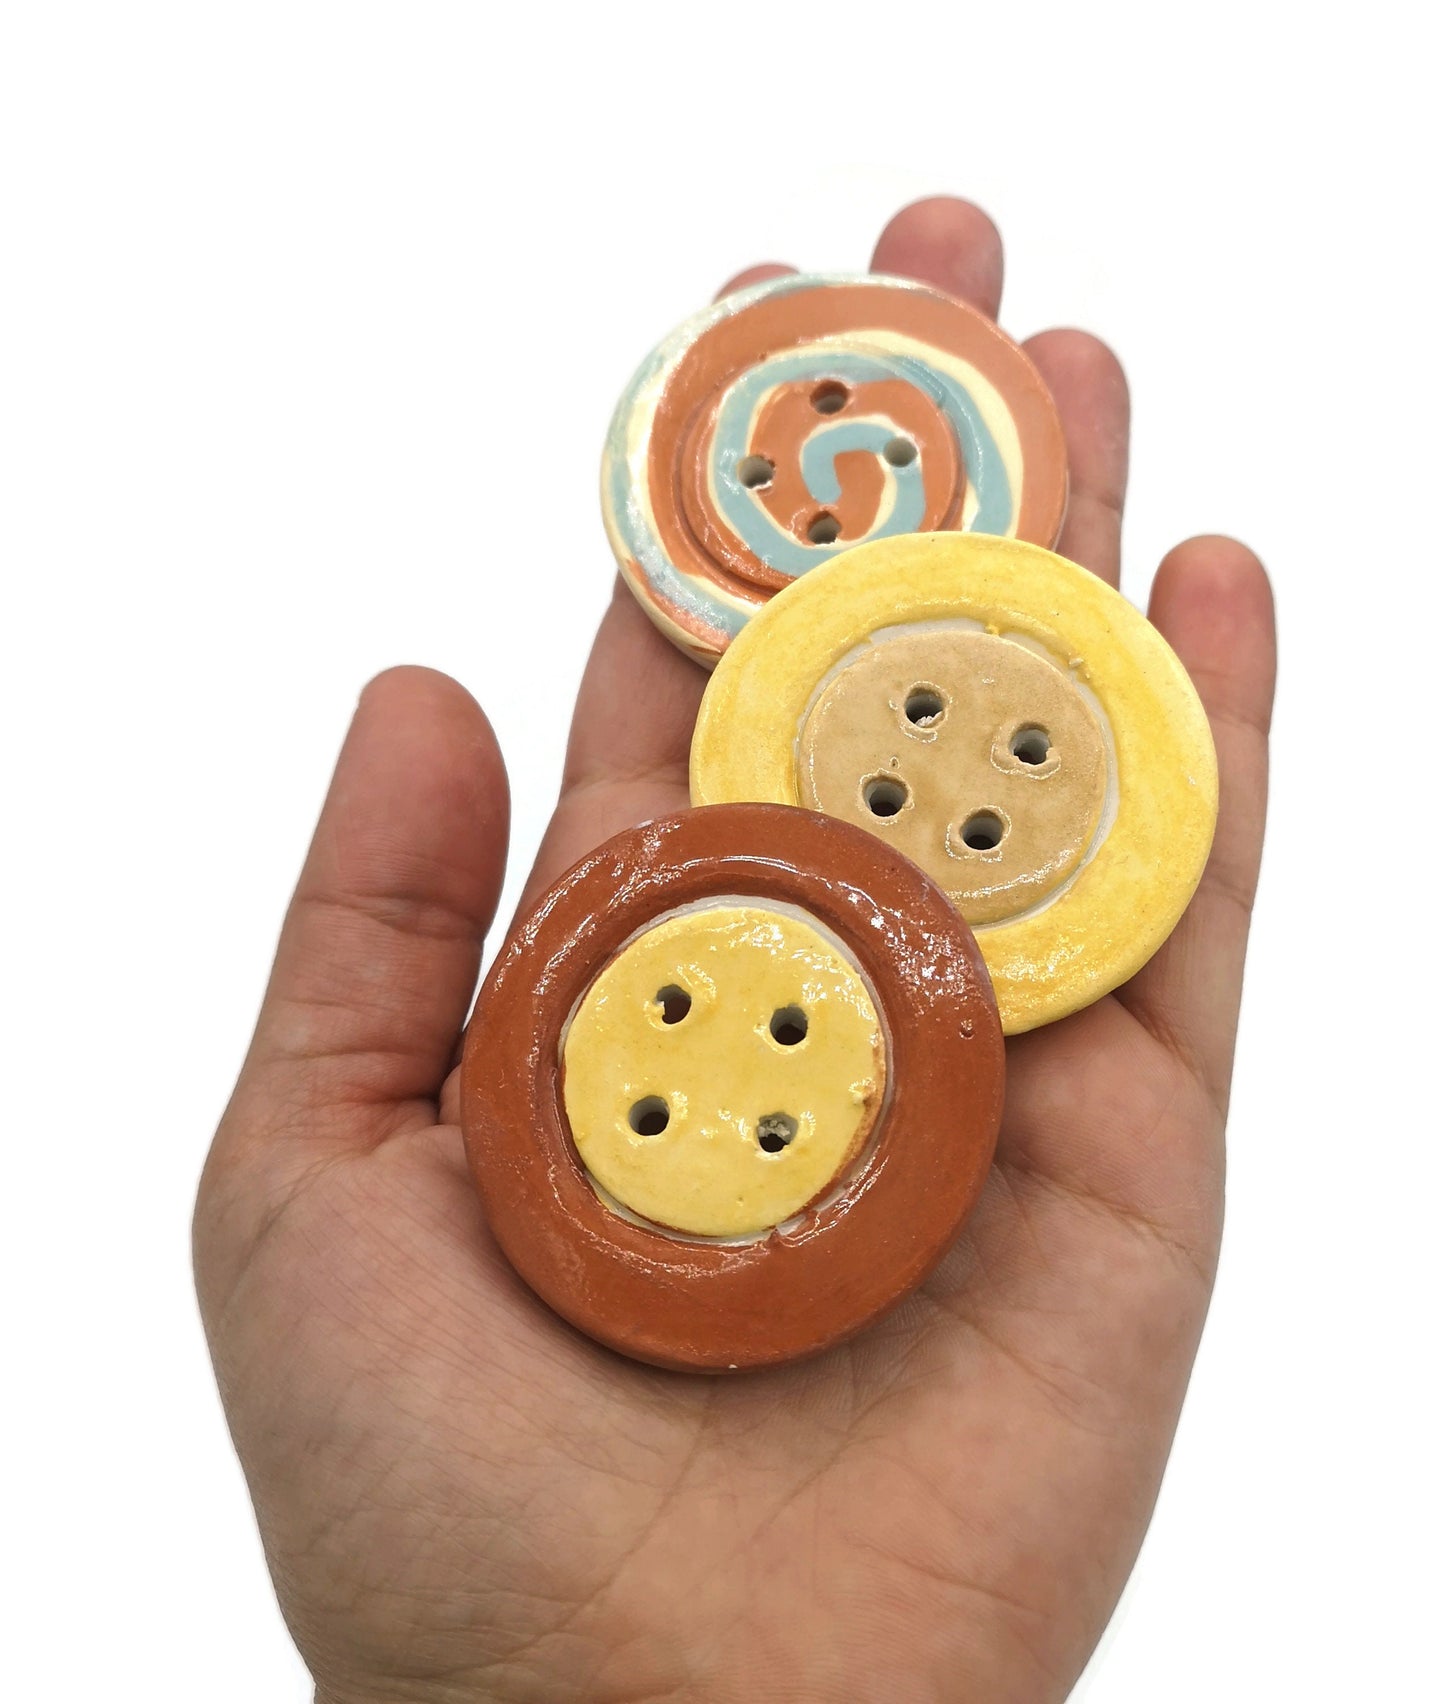 3Pc 45mm Extra Large Handmade Ceramic Novelty Sewing Buttons, Strange And Unusual Hand Painted Clay Buttons Lot Round Coat Button Decorative - Ceramica Ana Rafael